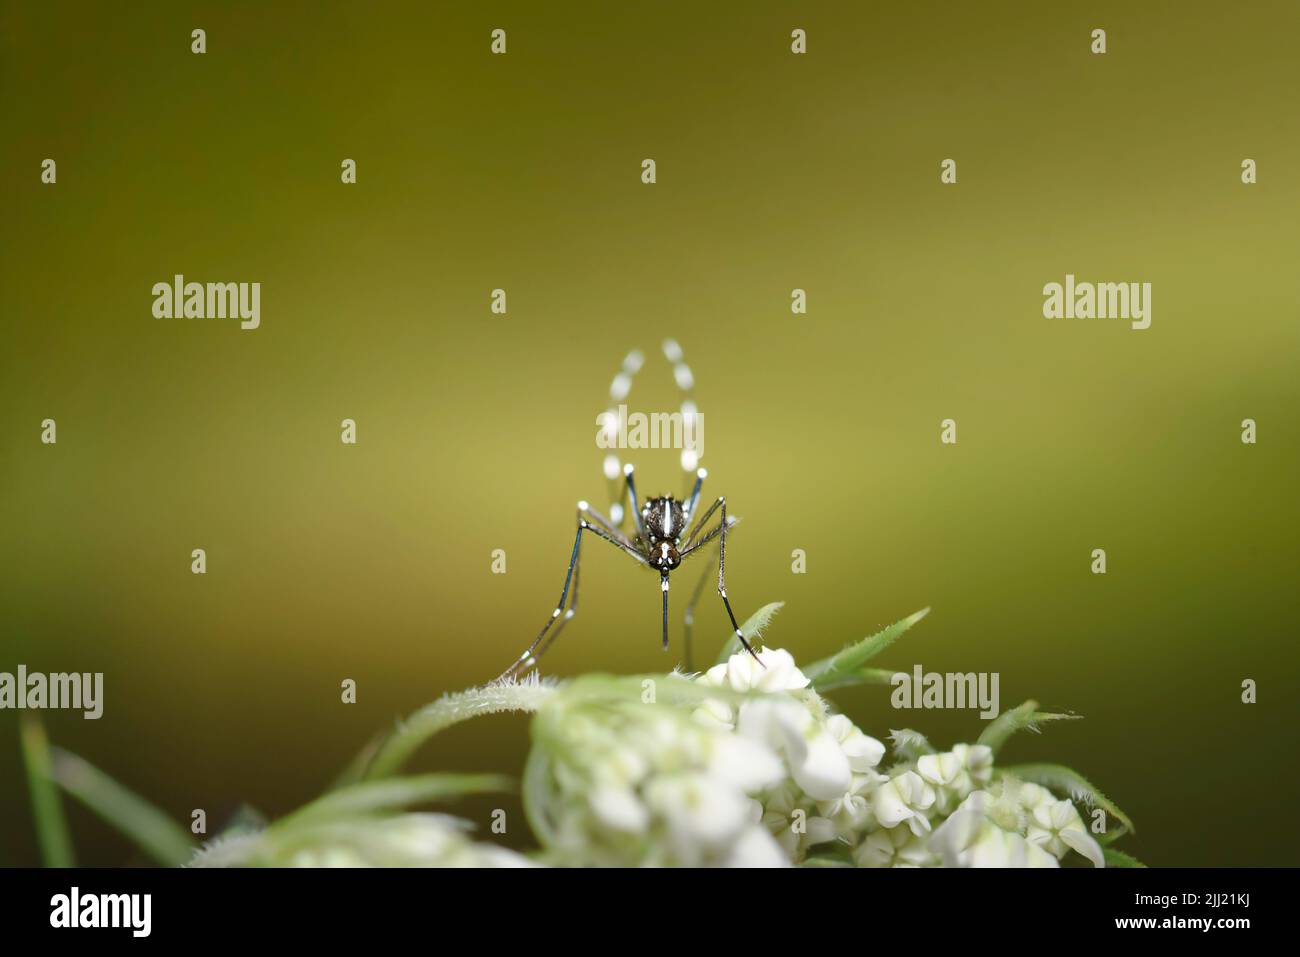 Aedes albopictus Mosquito in close focus flew on flower, surrounded by green out of focus background Stock Photo